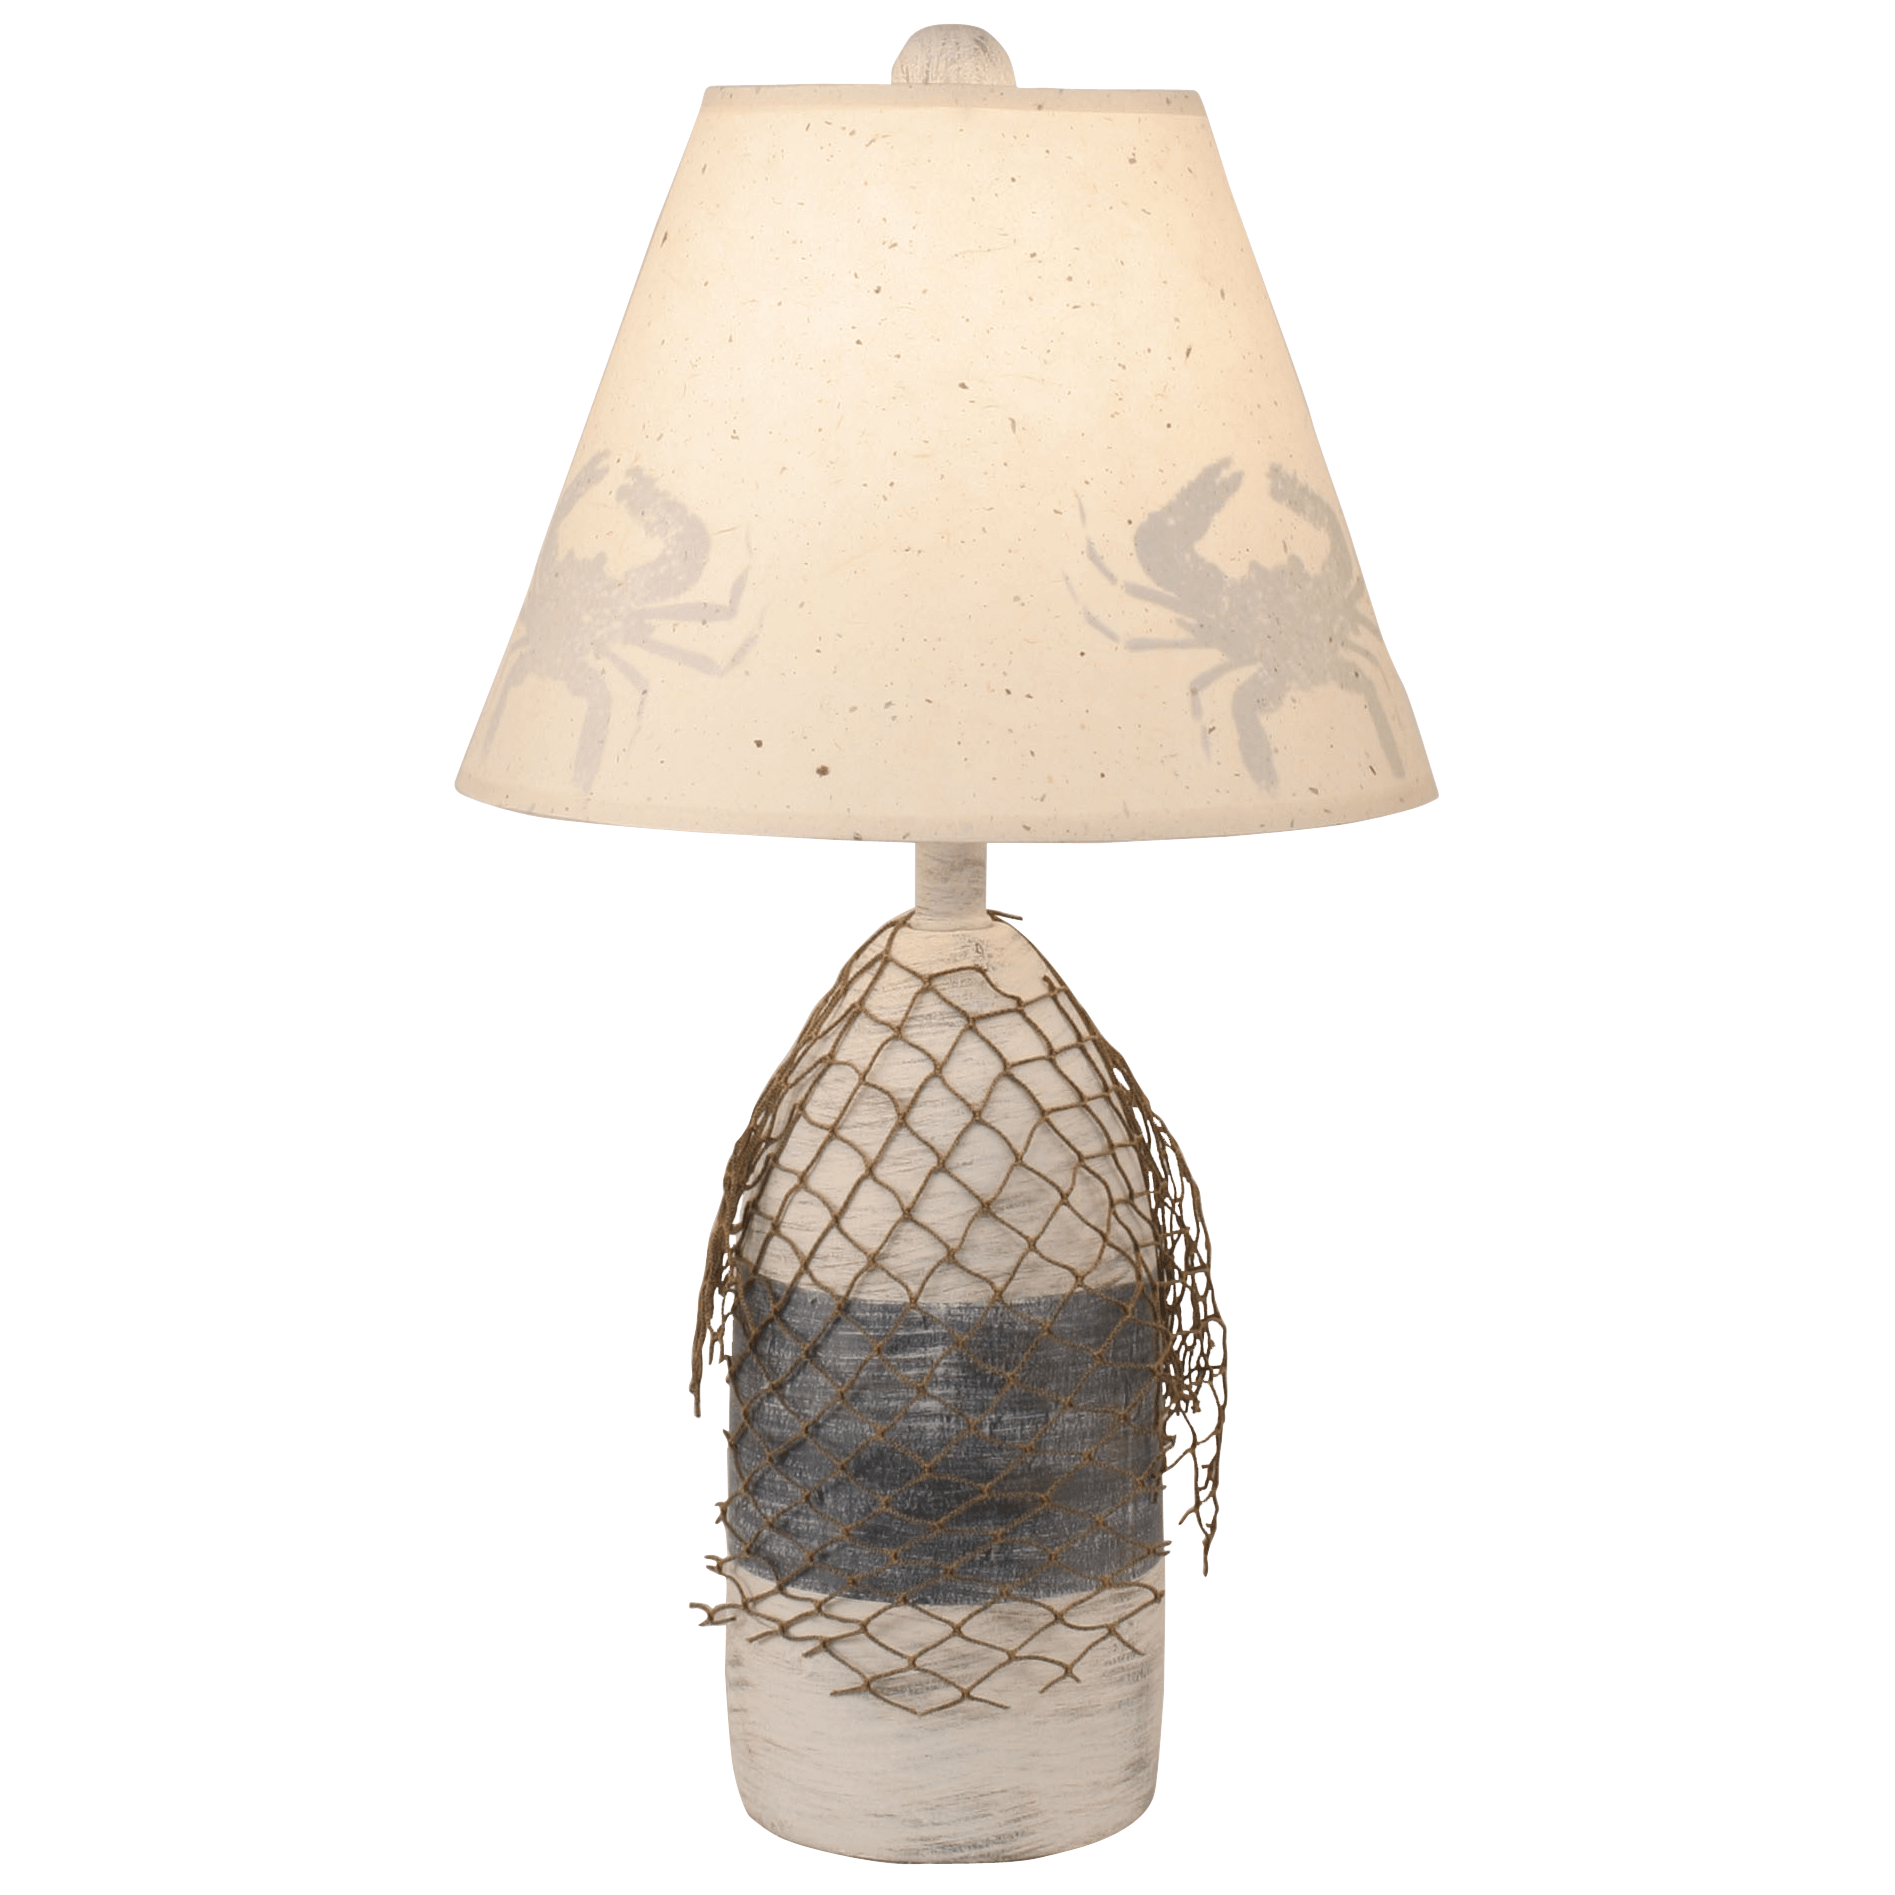 Small Buoy Table Lamp with Net